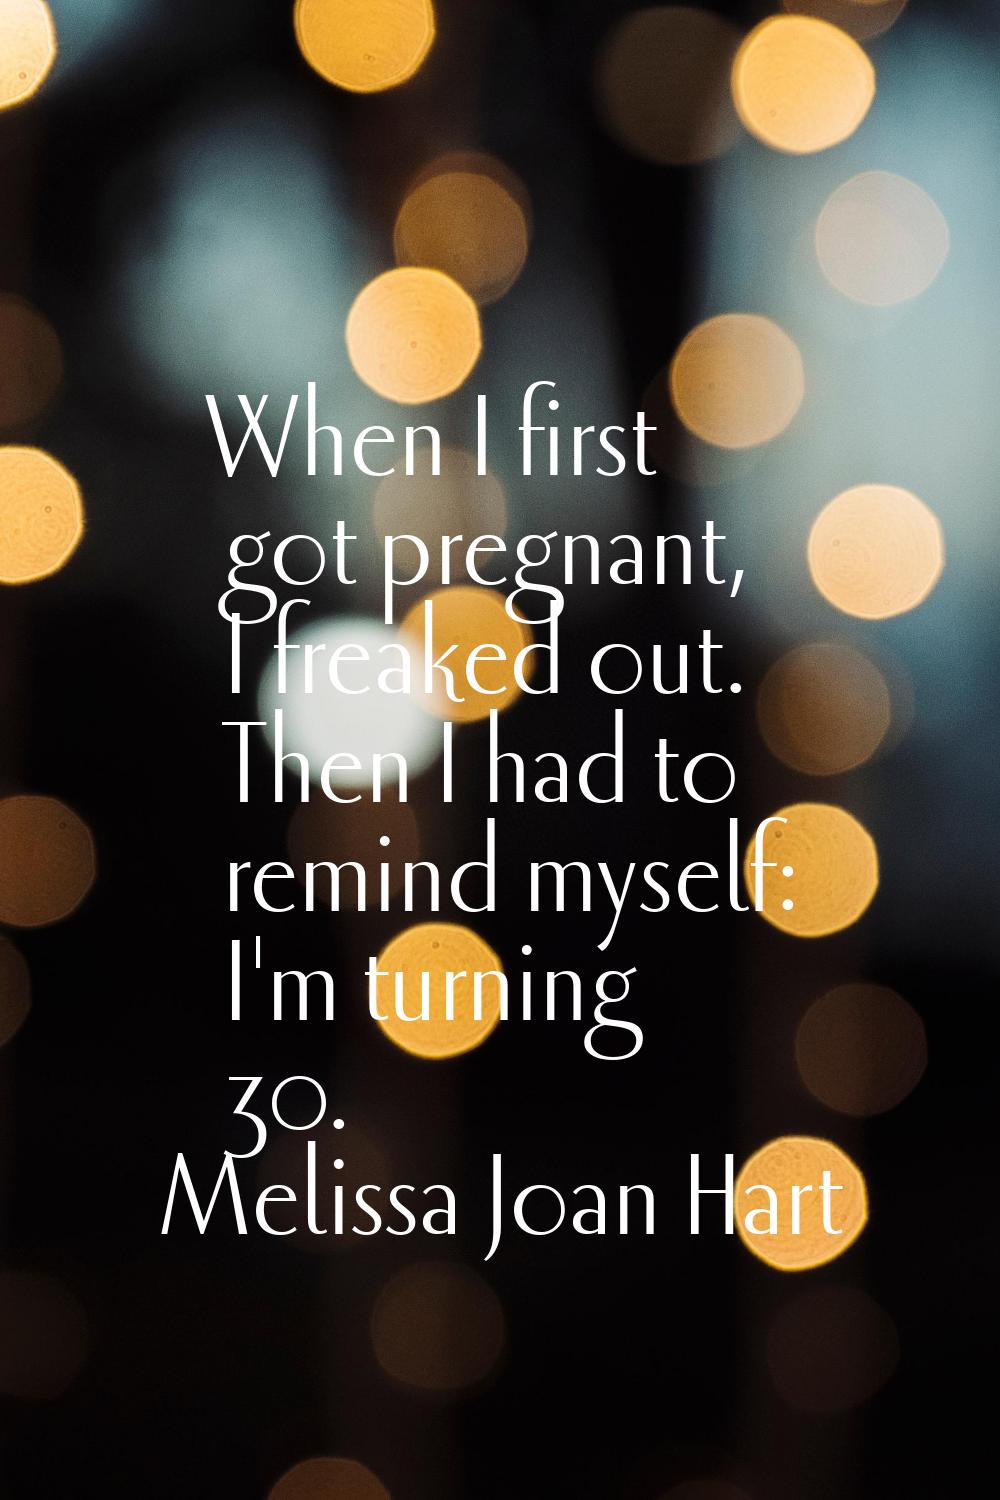 When I first got pregnant, I freaked out. Then I had to remind myself: I'm turning 30.